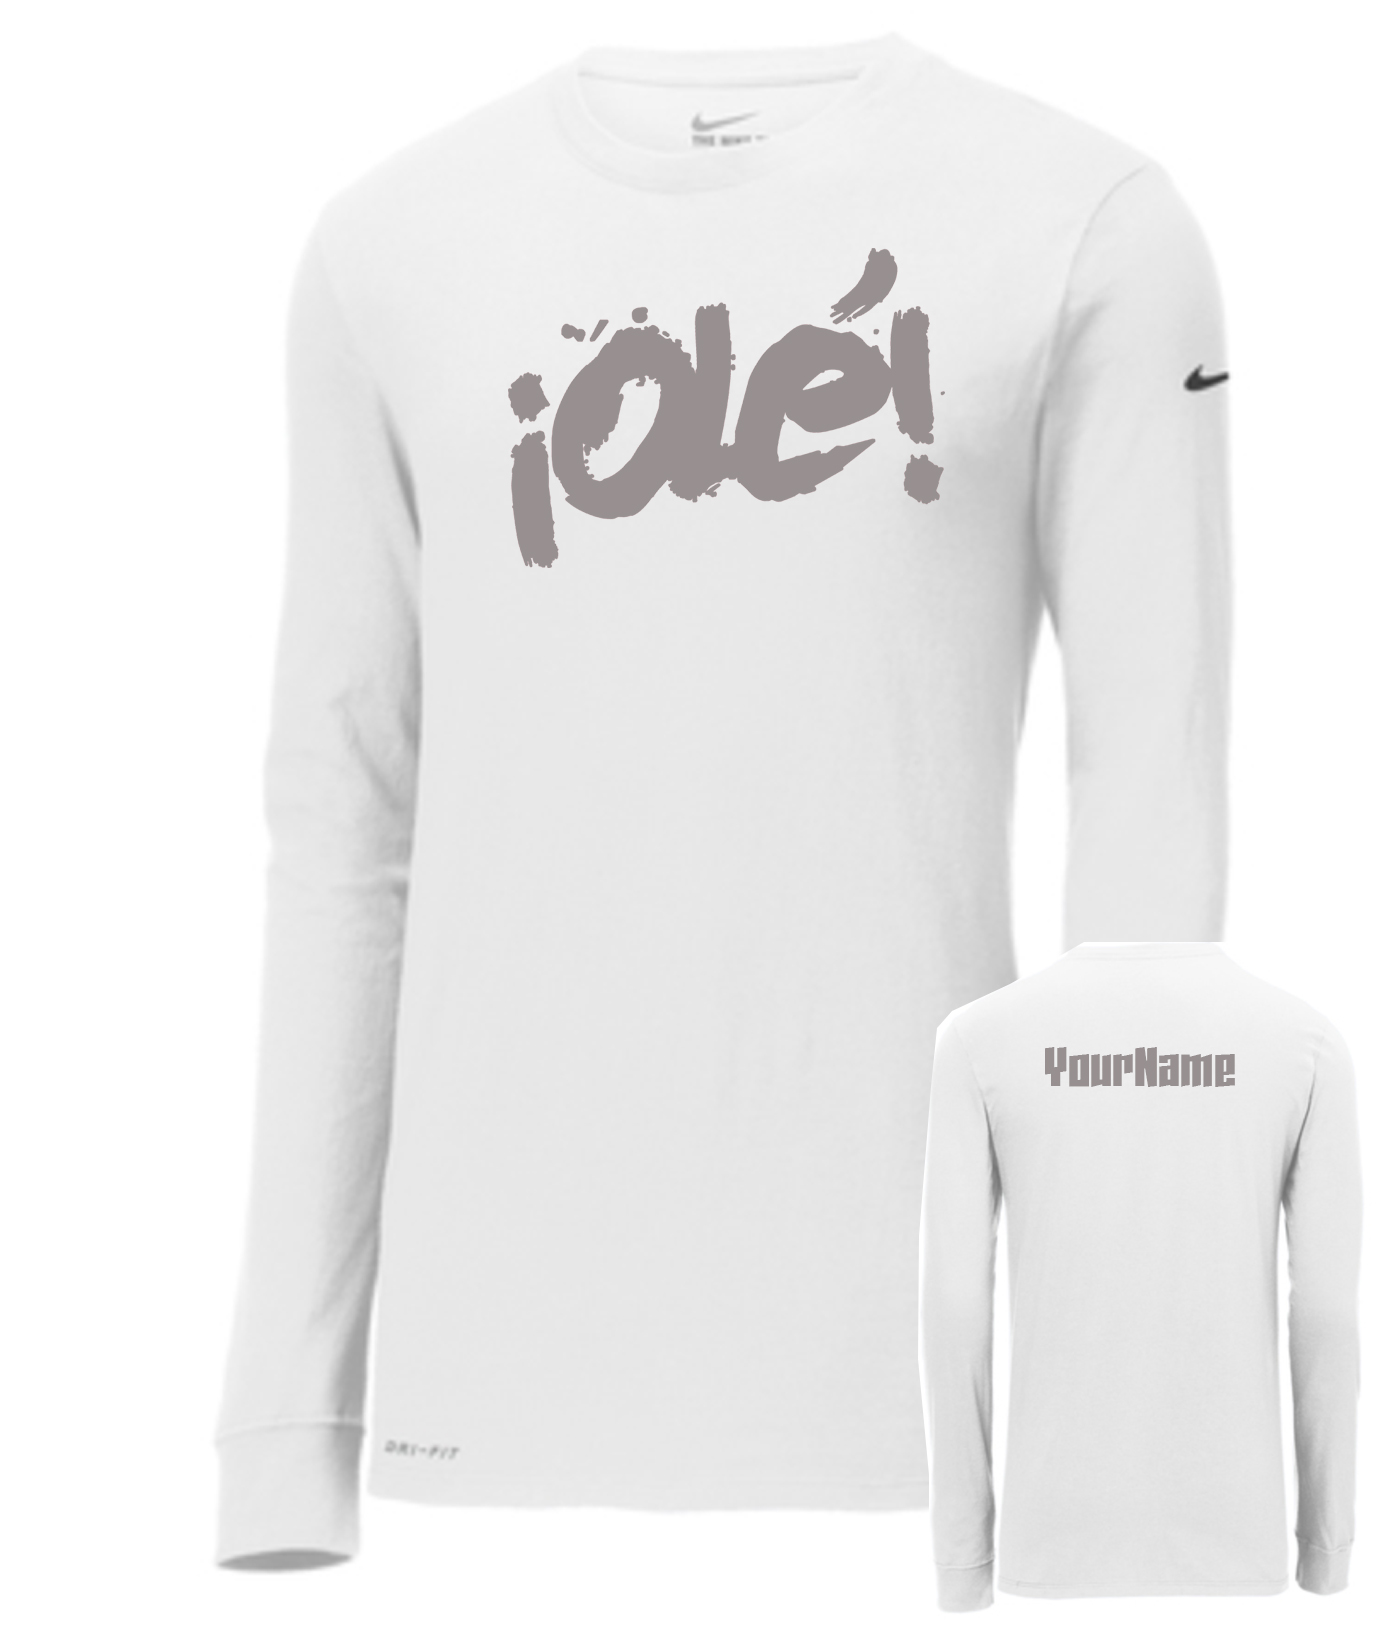 Nike Men's Dri-fit Just Do It Graphic T-shirt In Black